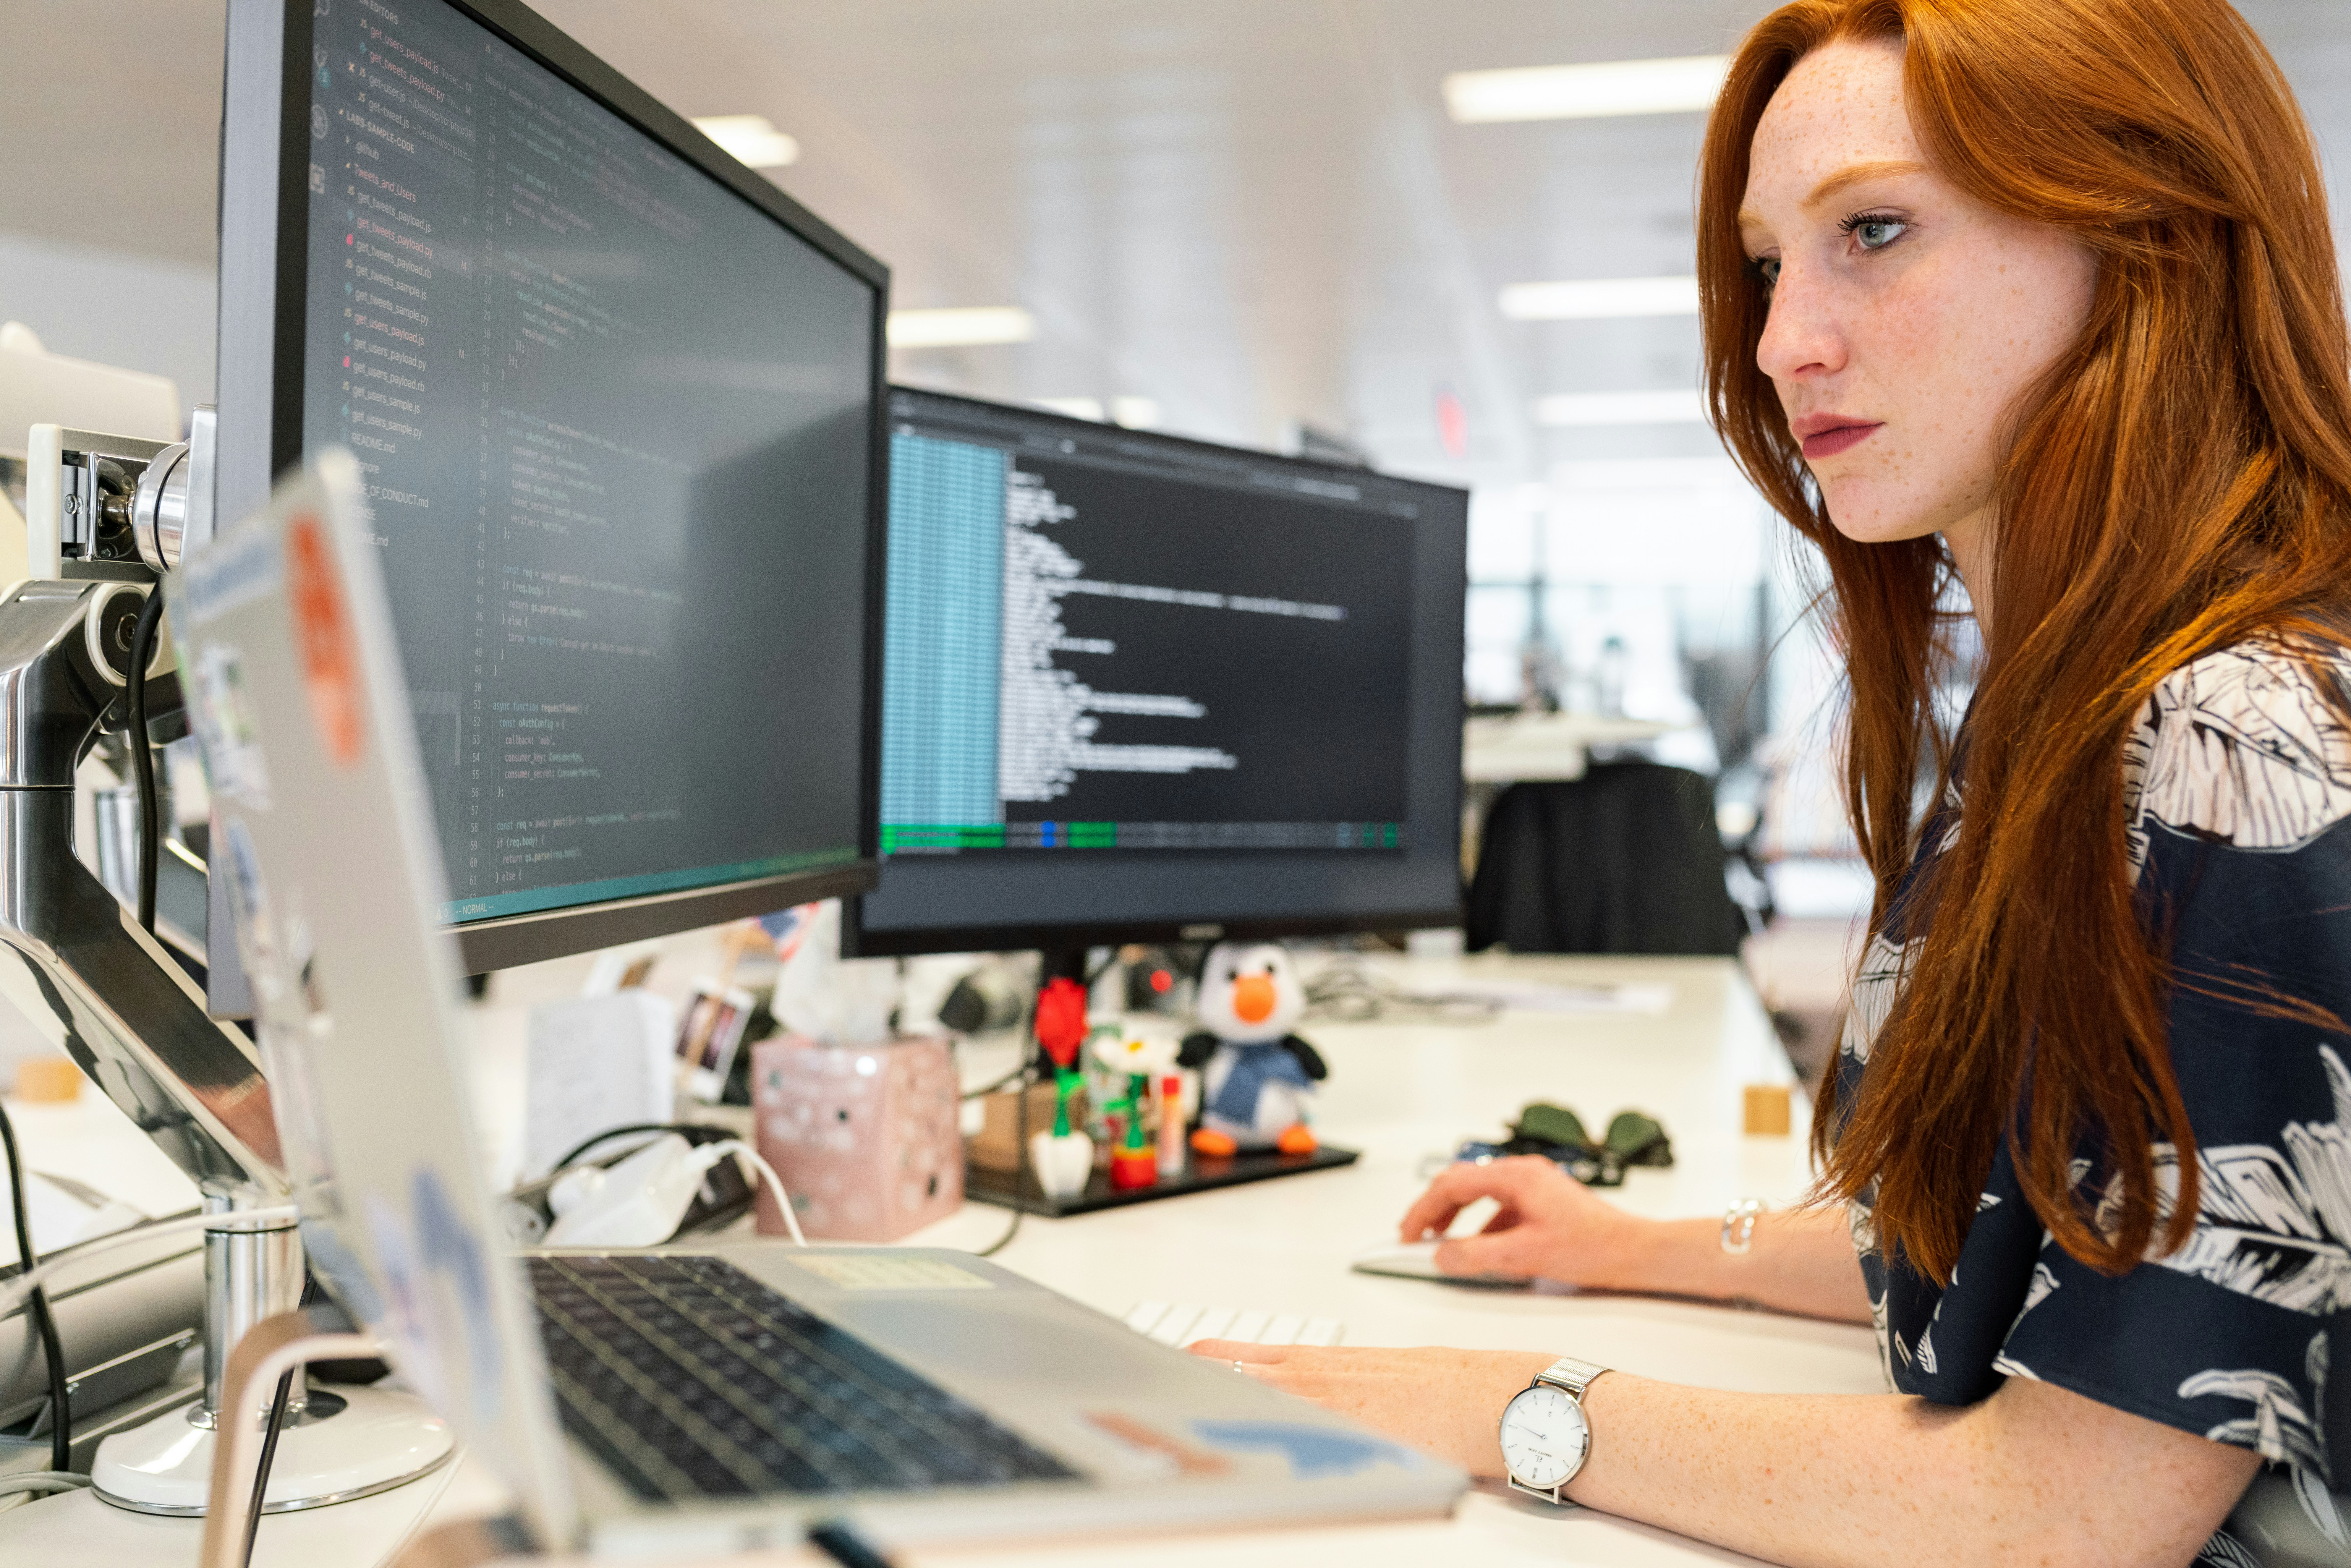 Woman with red hair seated at computer with dual monitors and her head turned left.